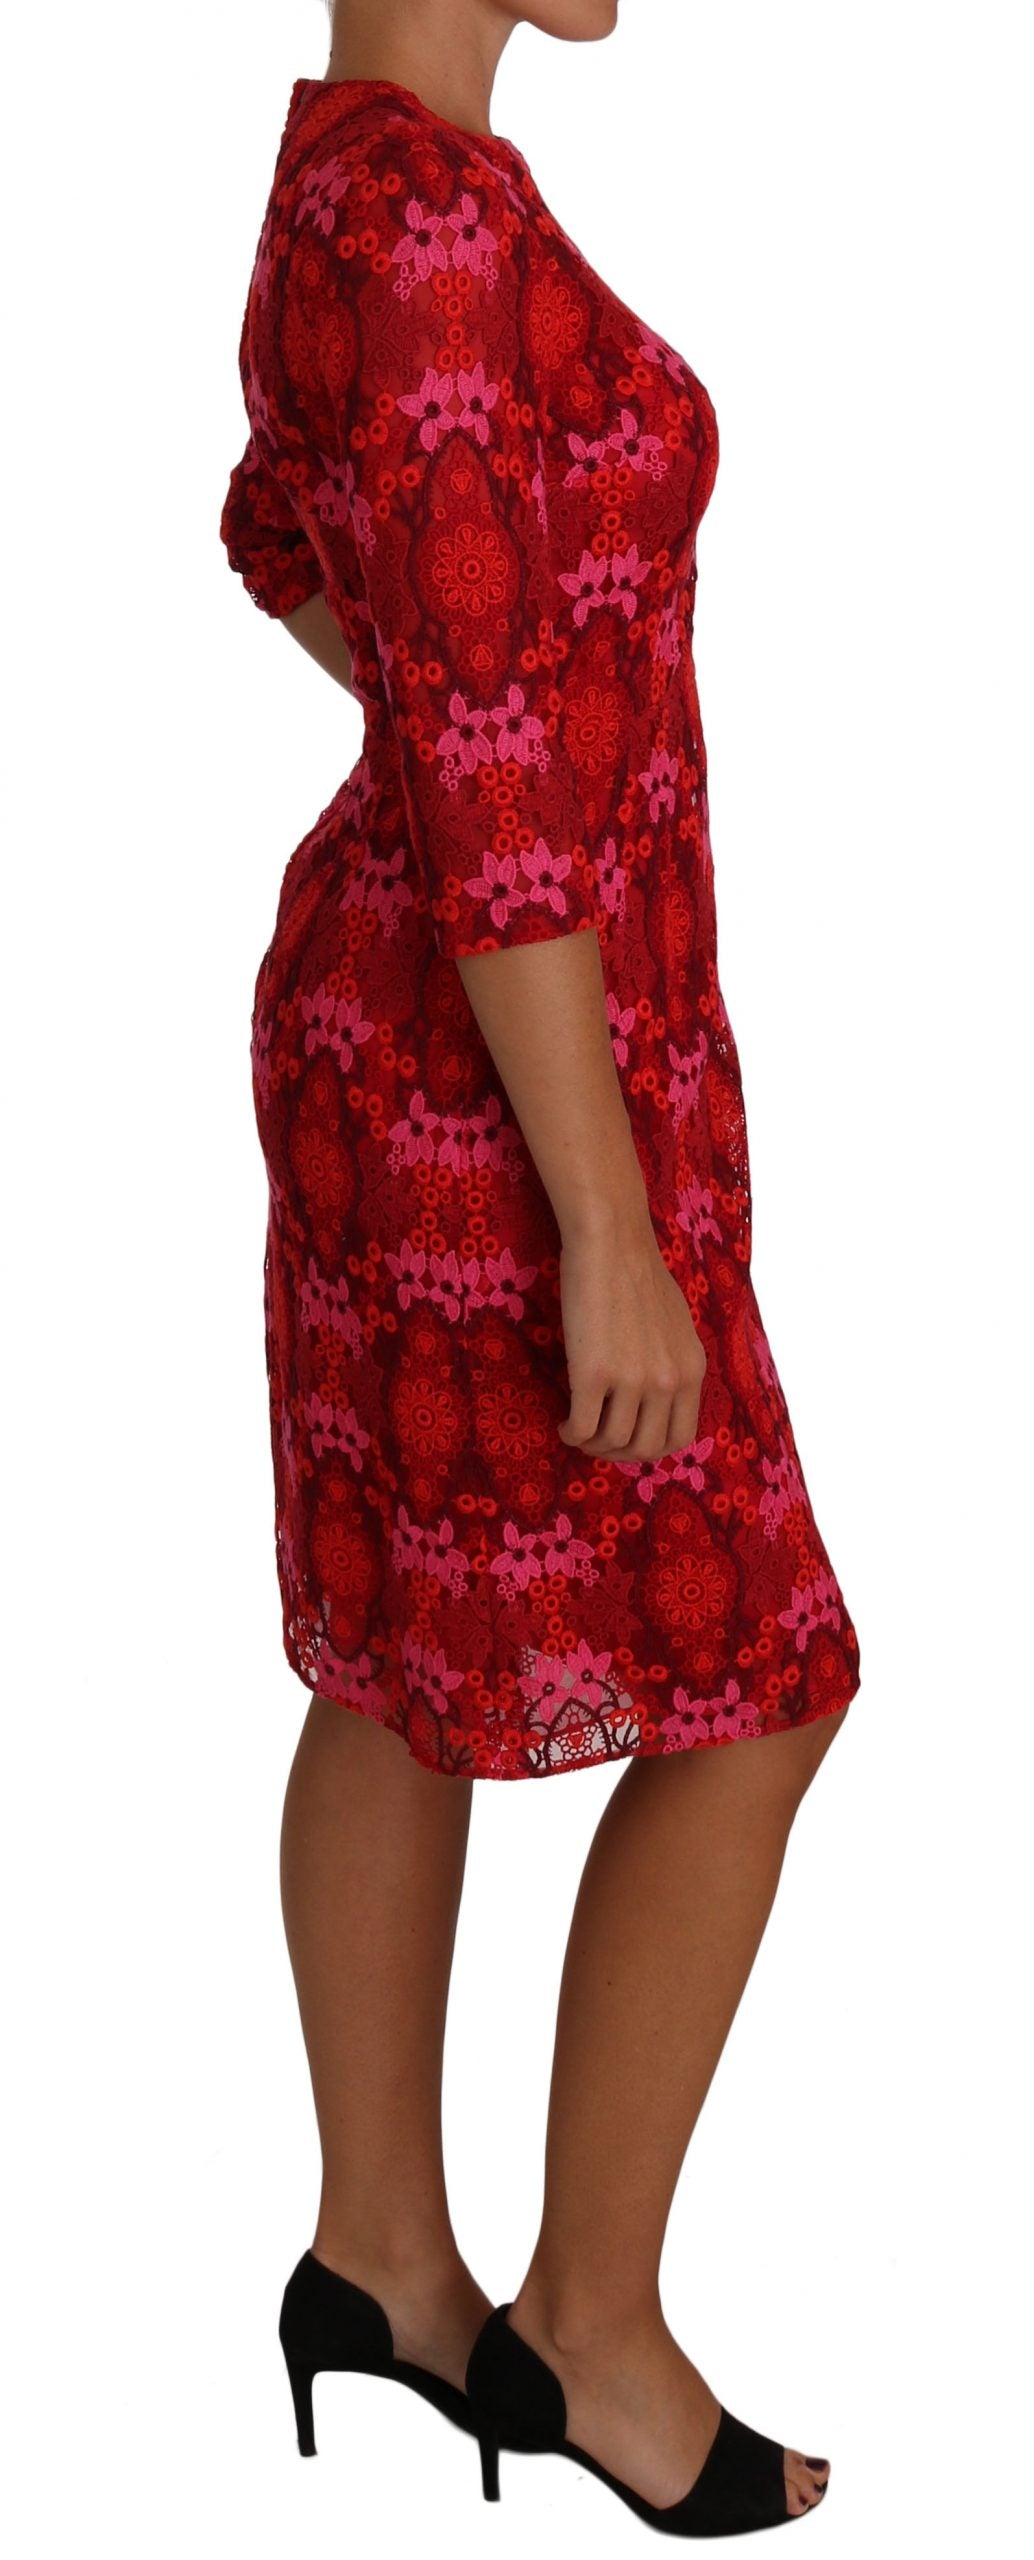 Floral Crochet Lace Red Pink Sheath Dress